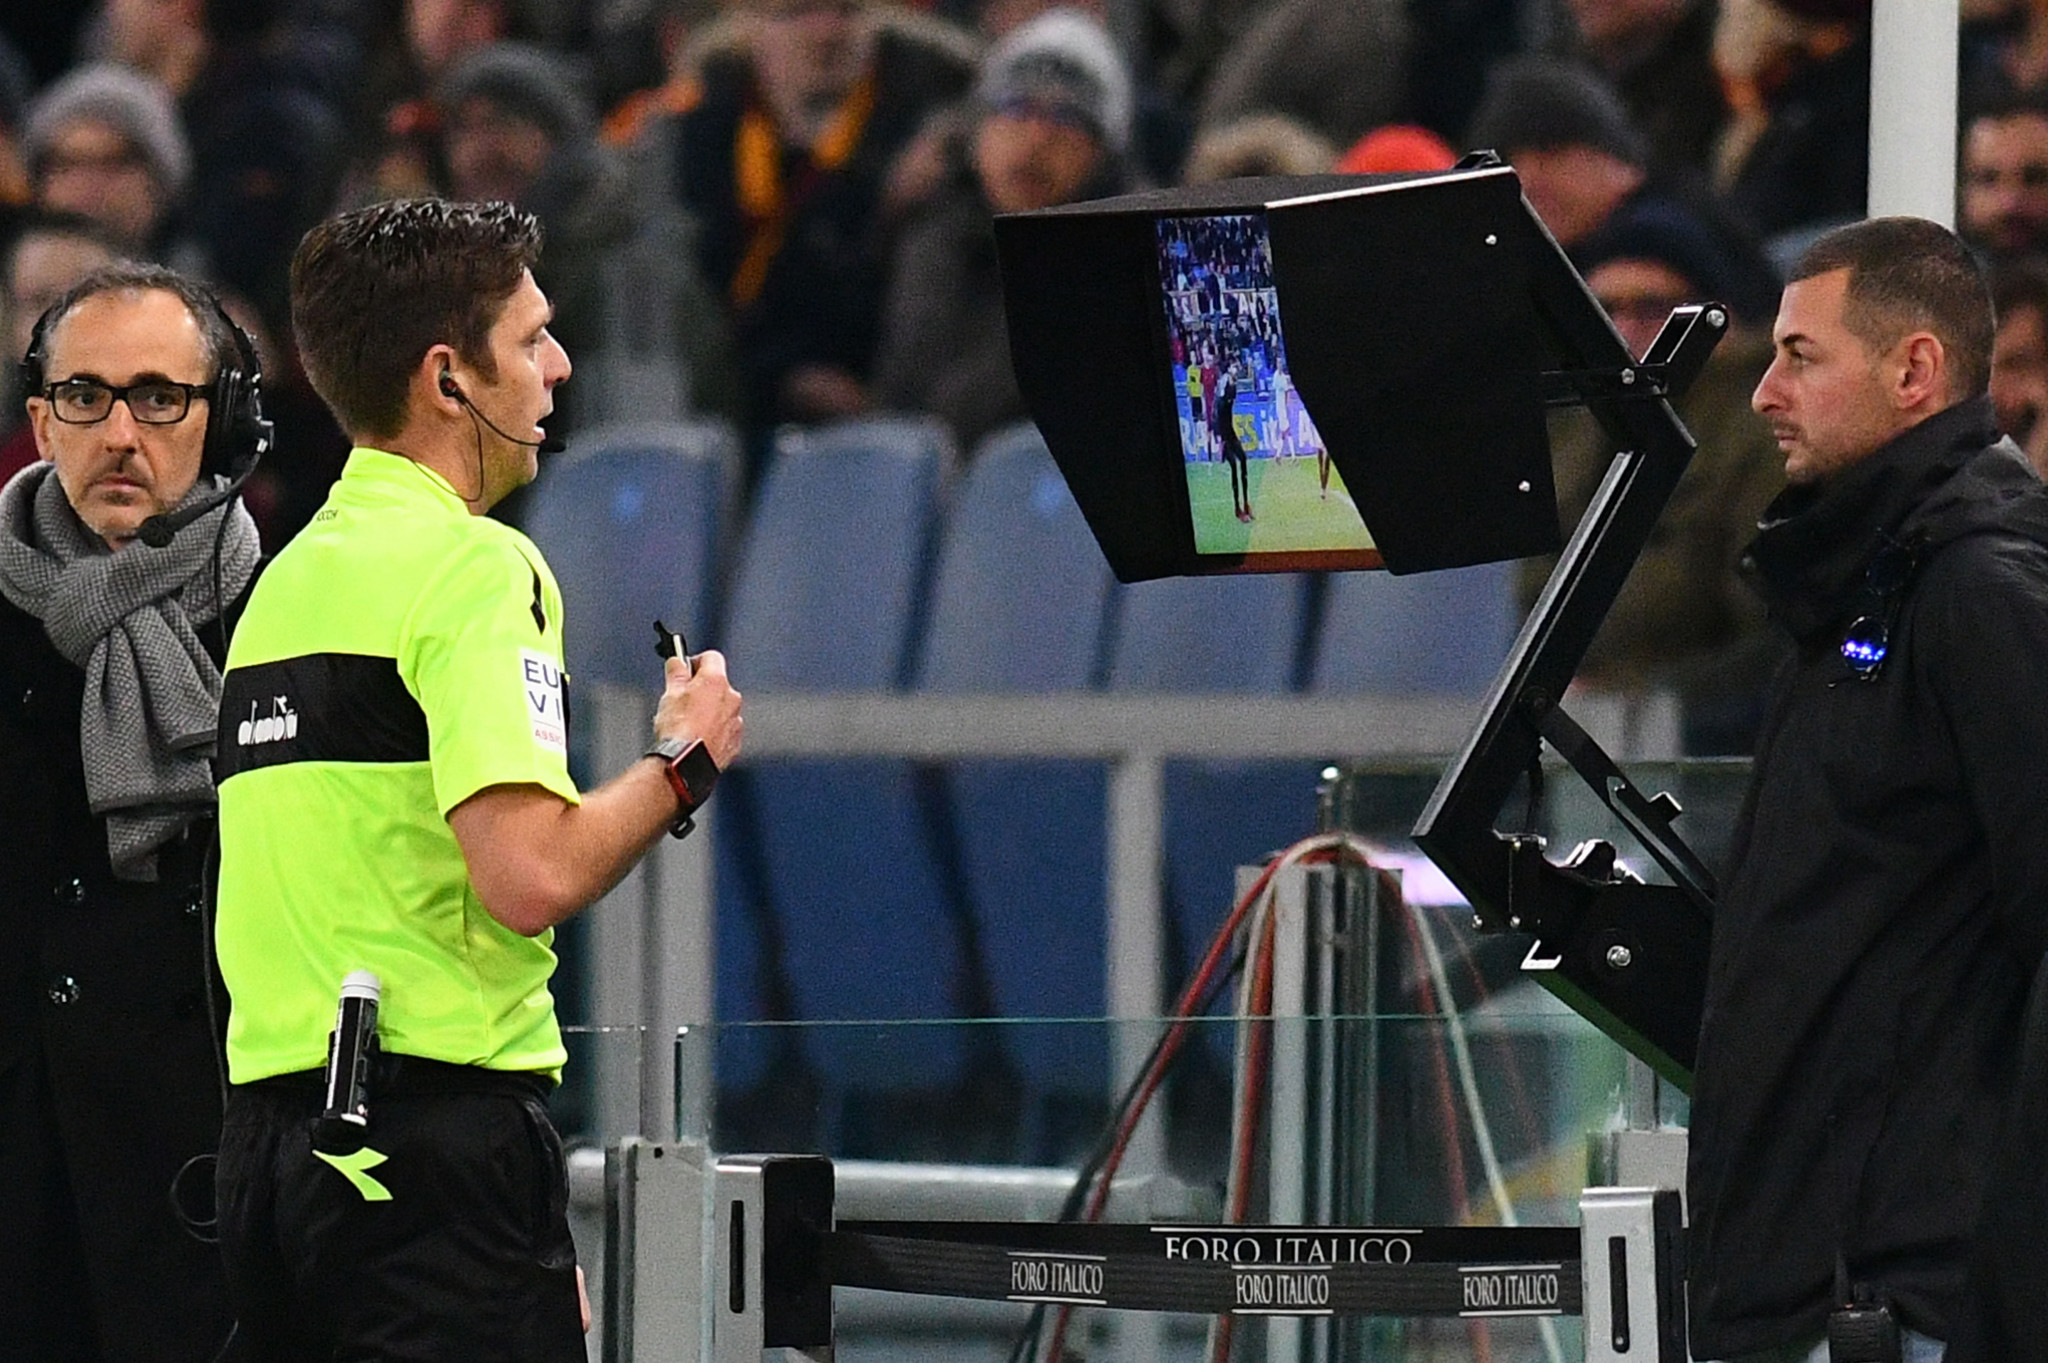 The VAR system has so far met a mixed response during trials in leagues across the world ©Getty Images